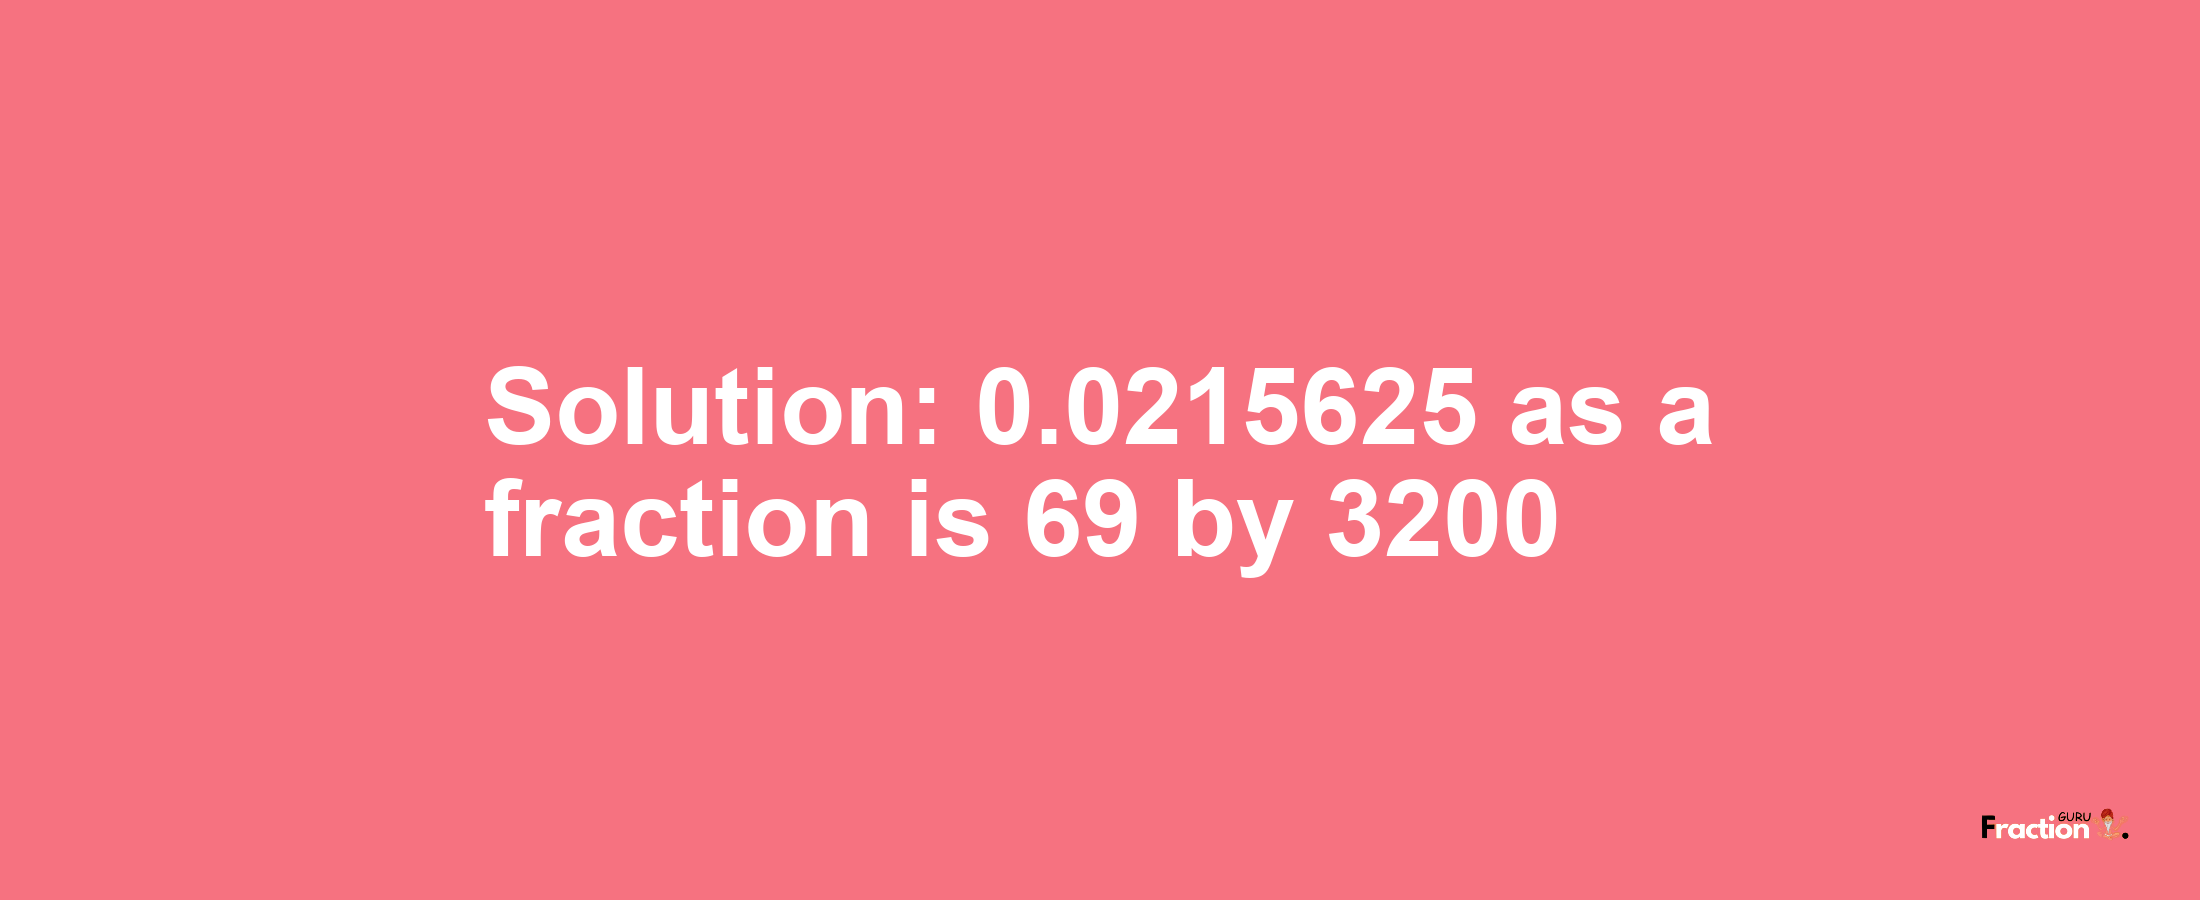 Solution:0.0215625 as a fraction is 69/3200